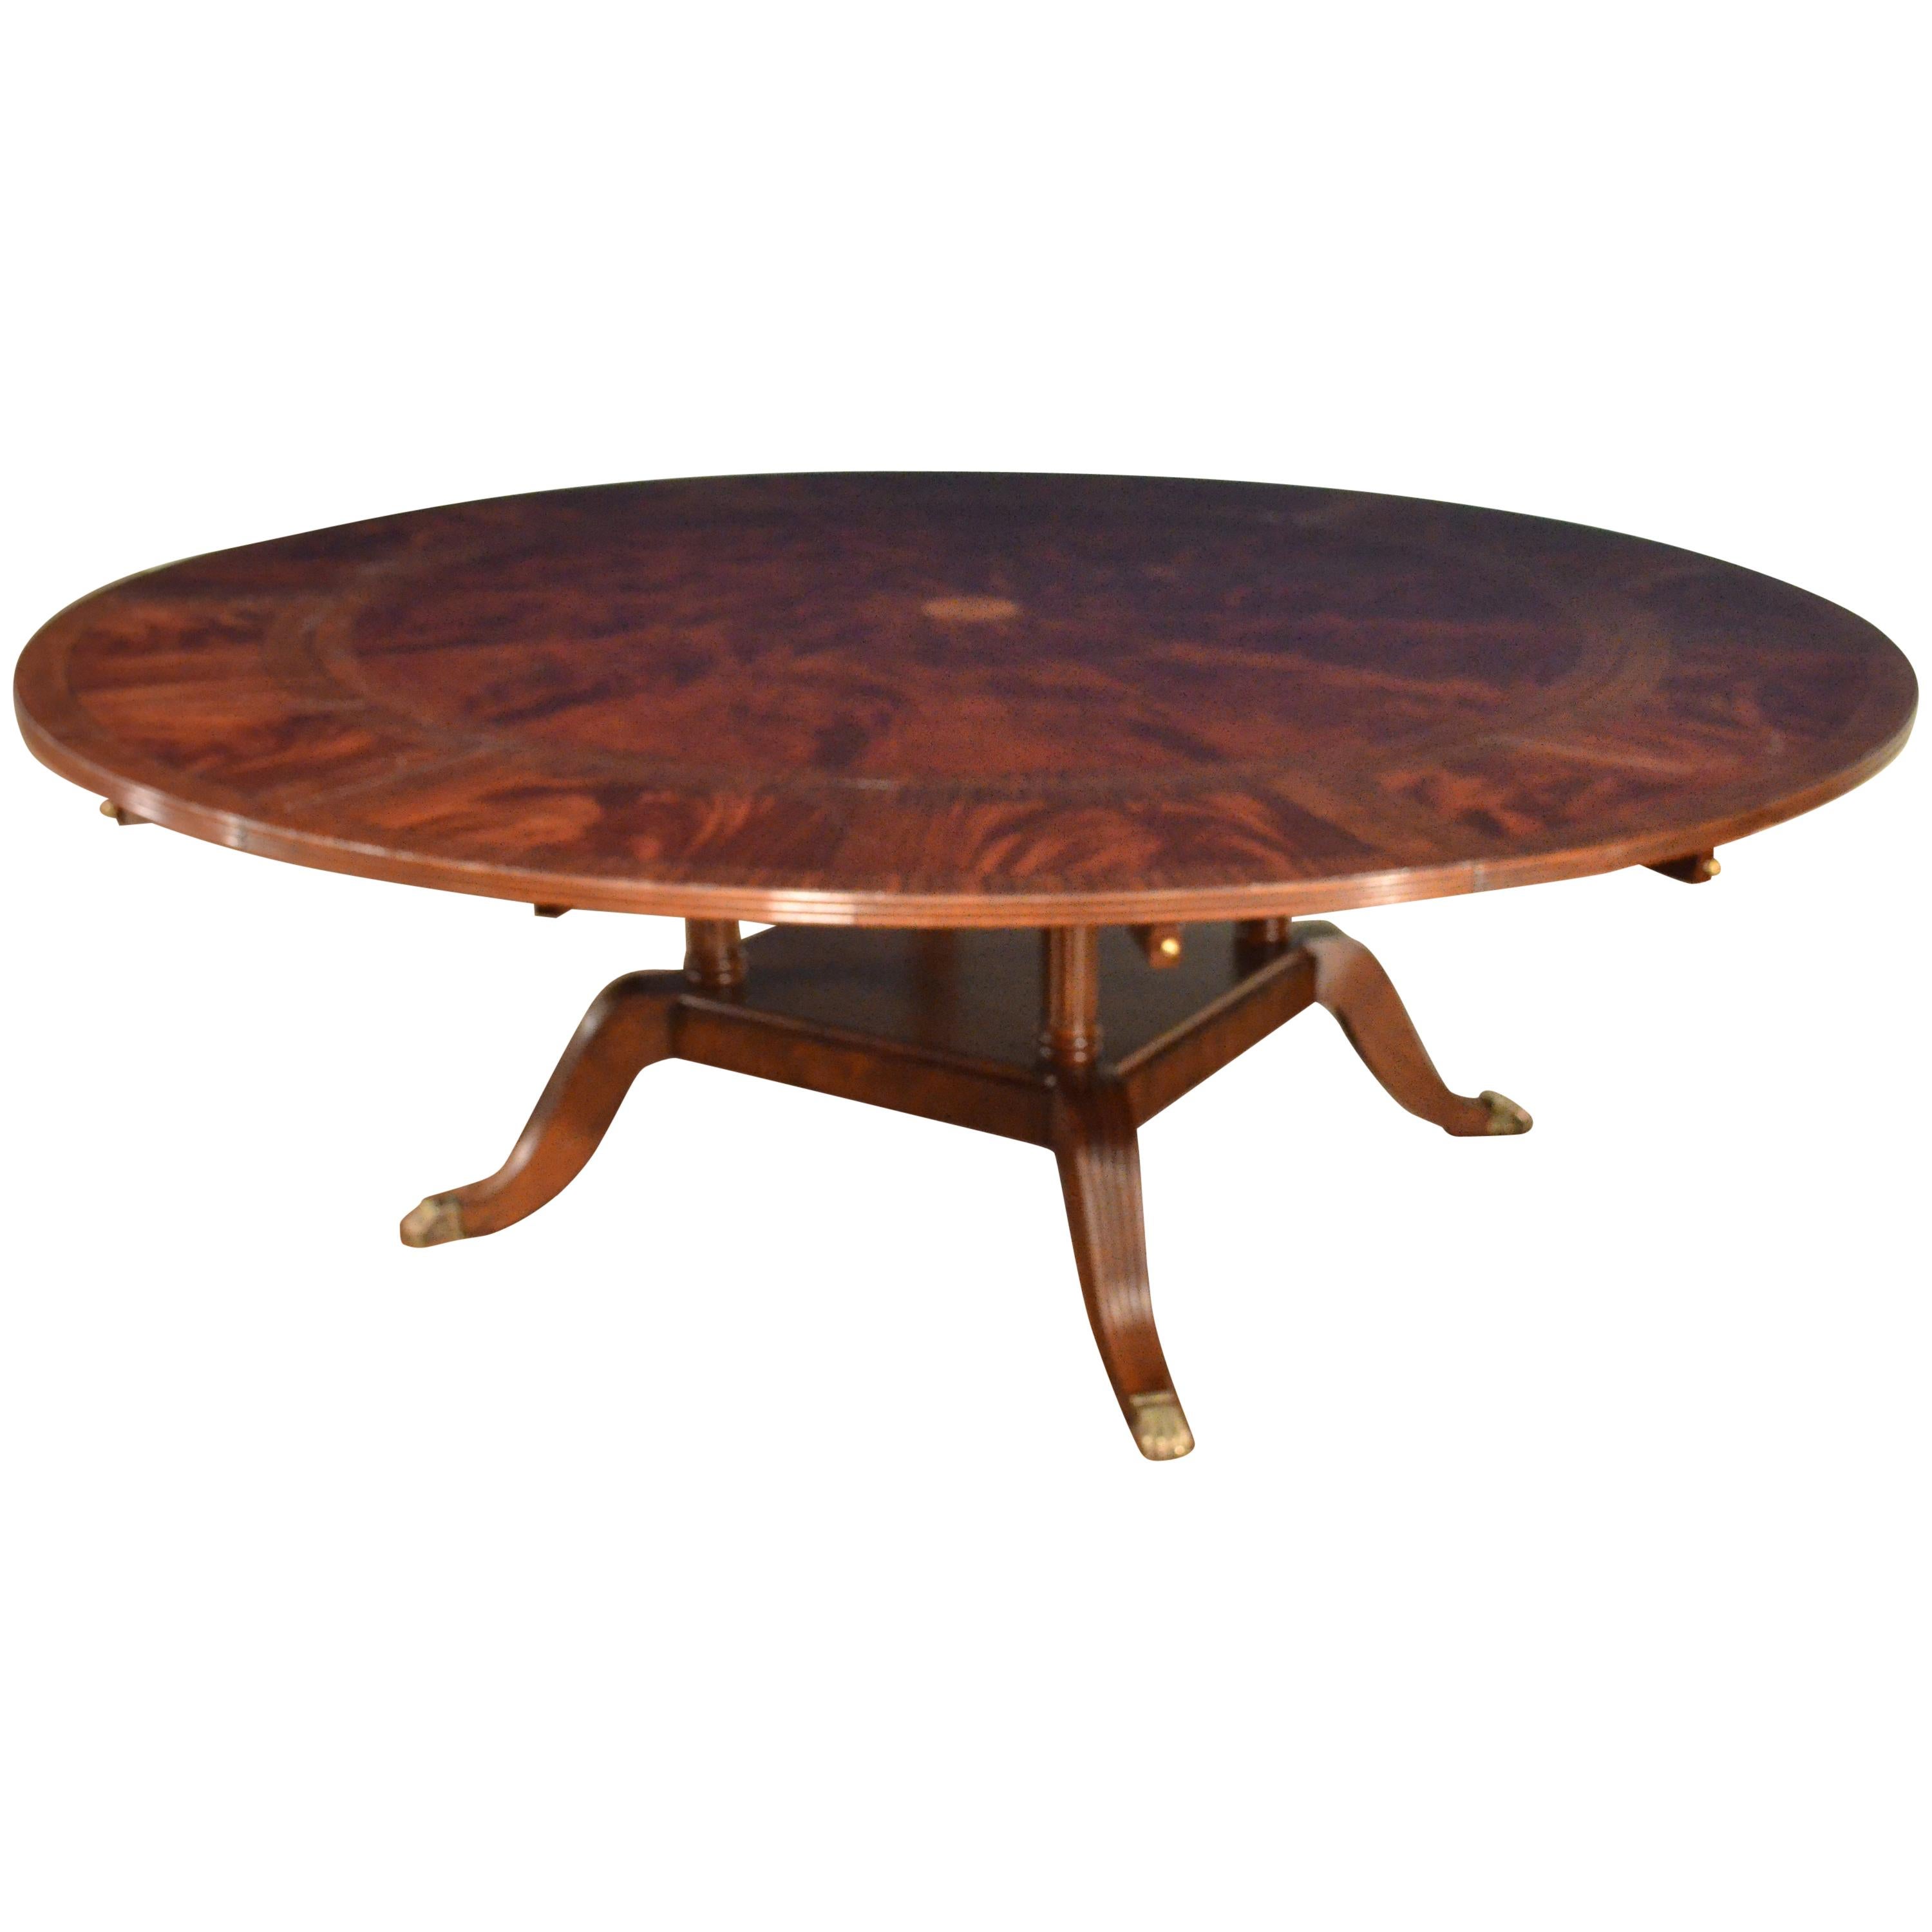 Large Round Perimeter Leaf Mahogany Georgian Style Dining Table by Leighton Hall For Sale